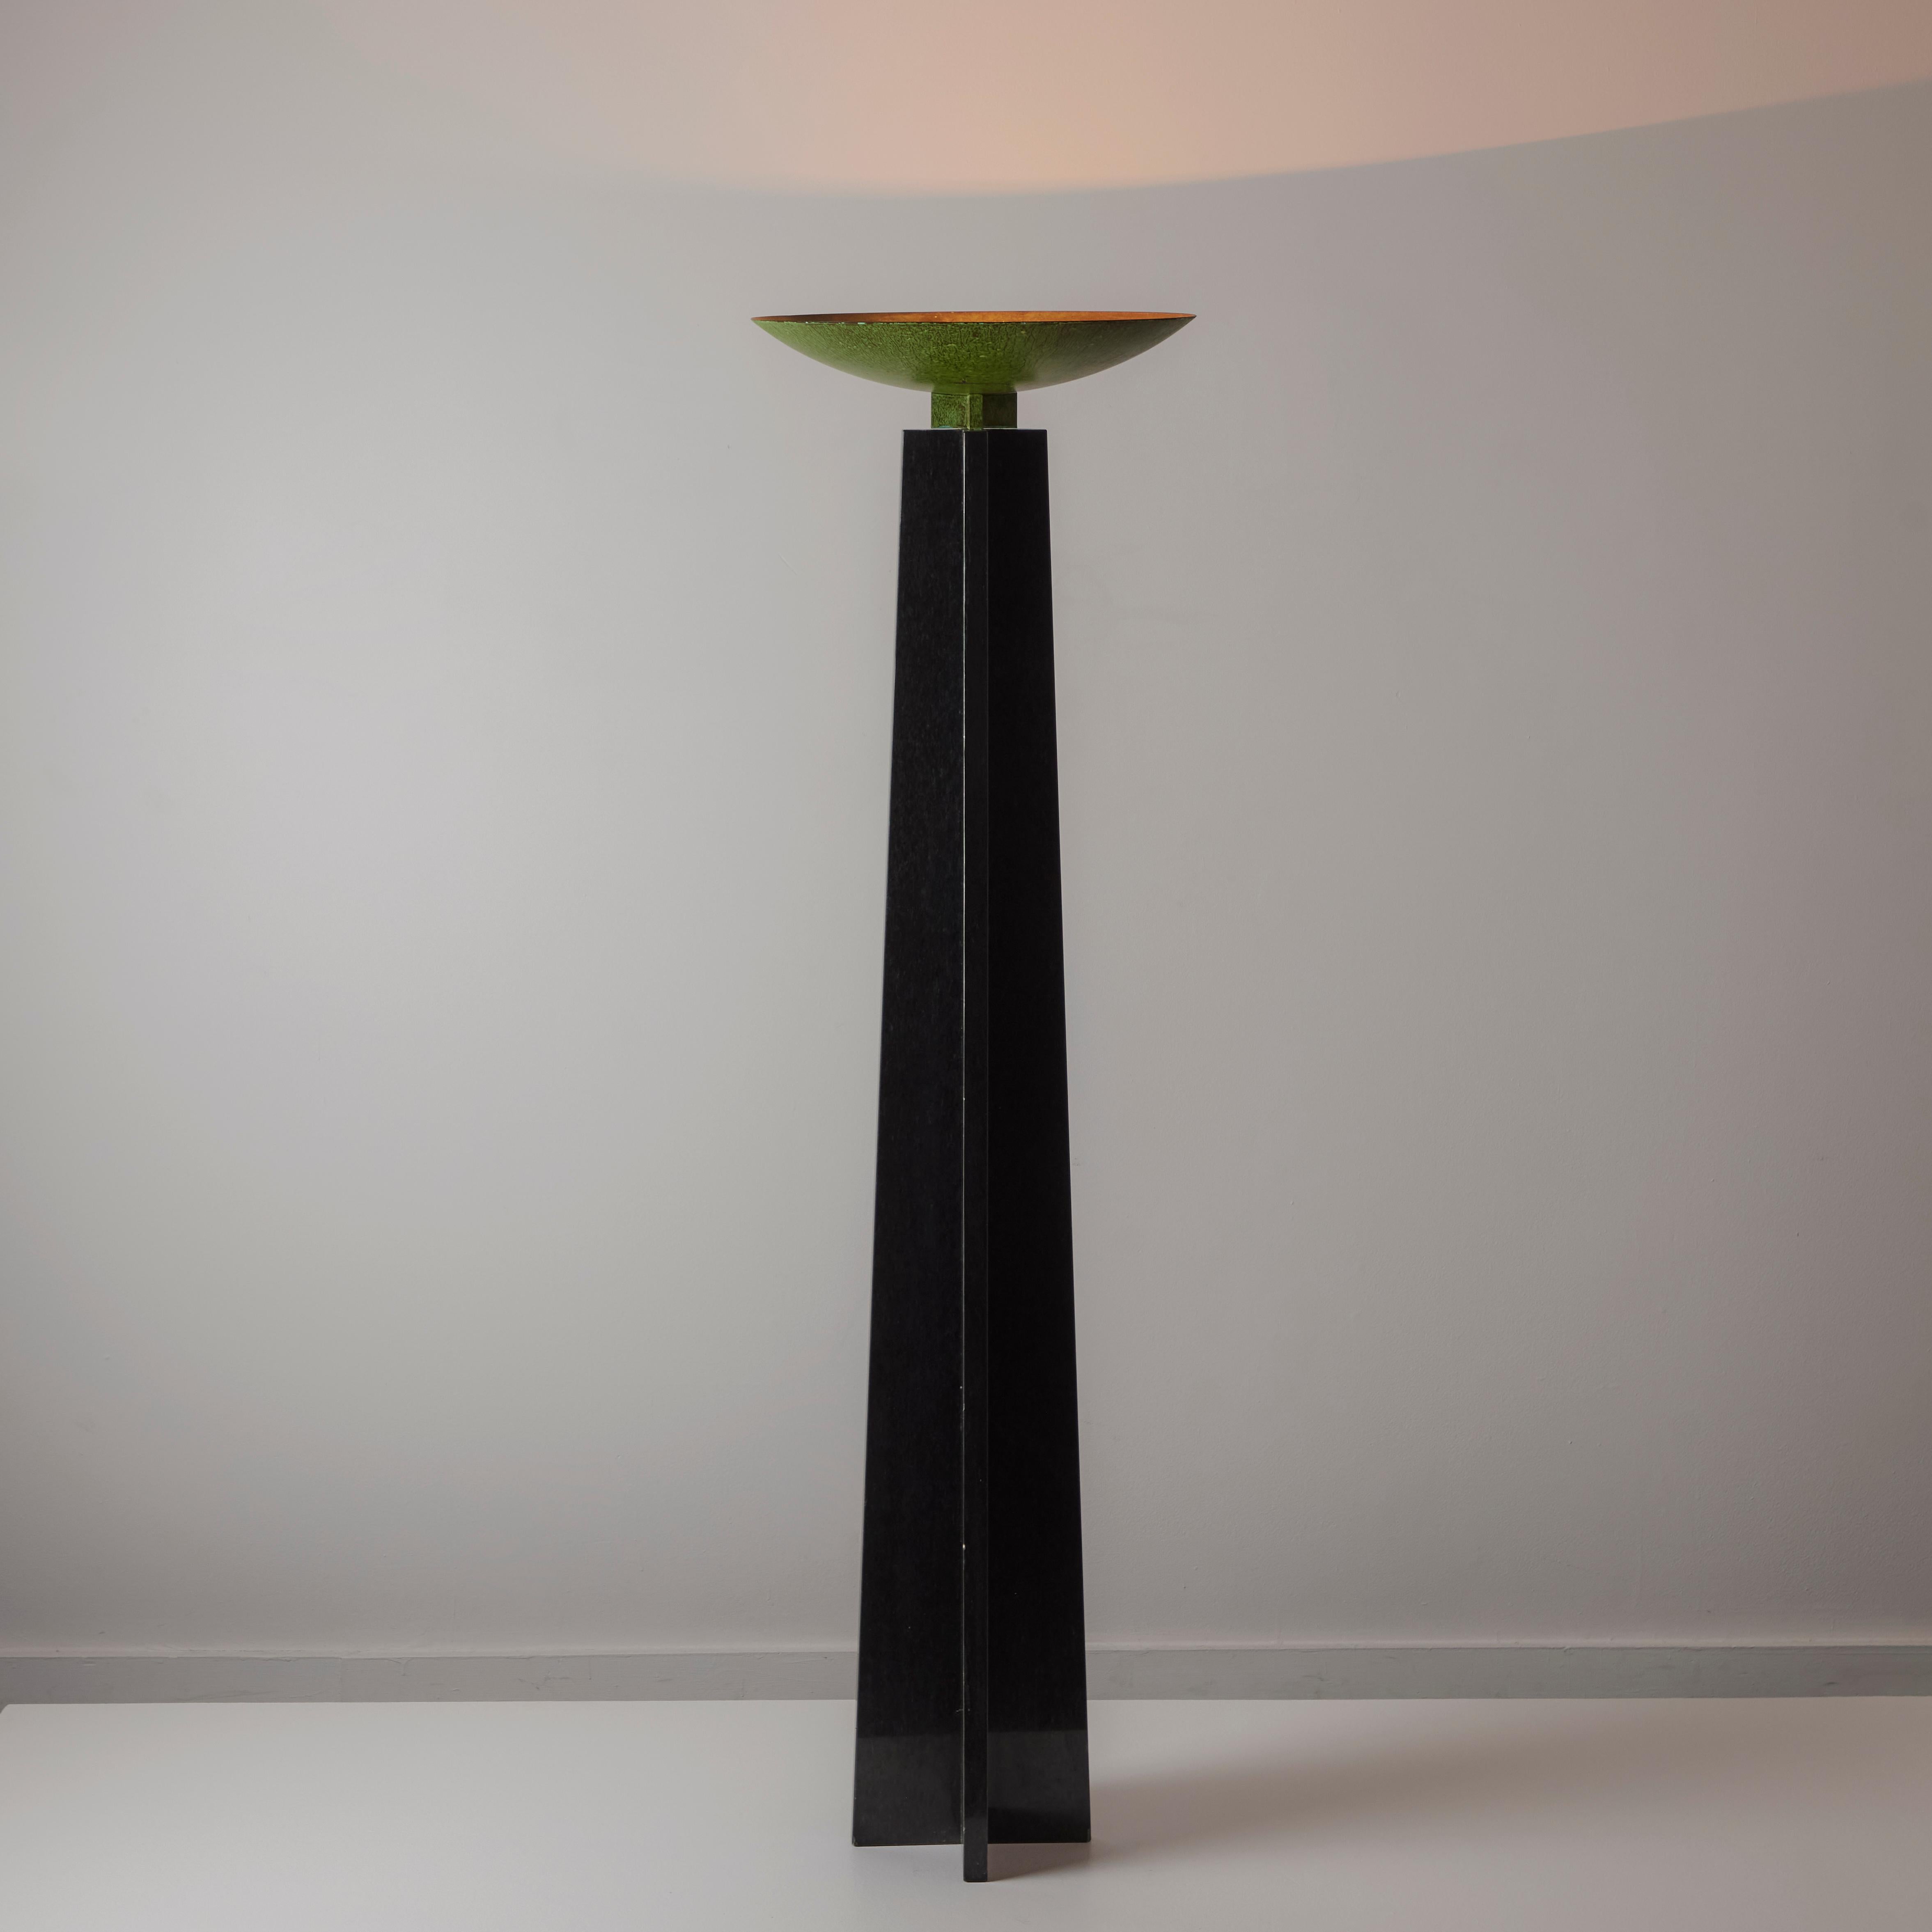 'Wagneriana' marble floor lamp by Lella and Massimo Vignelli. Designed and manufactured in Italy, 1986. A monolithic black marble floor lamp adorned with a brass bowl-shaped shade. The shade has been expertly patinated with a verde finish. Floor